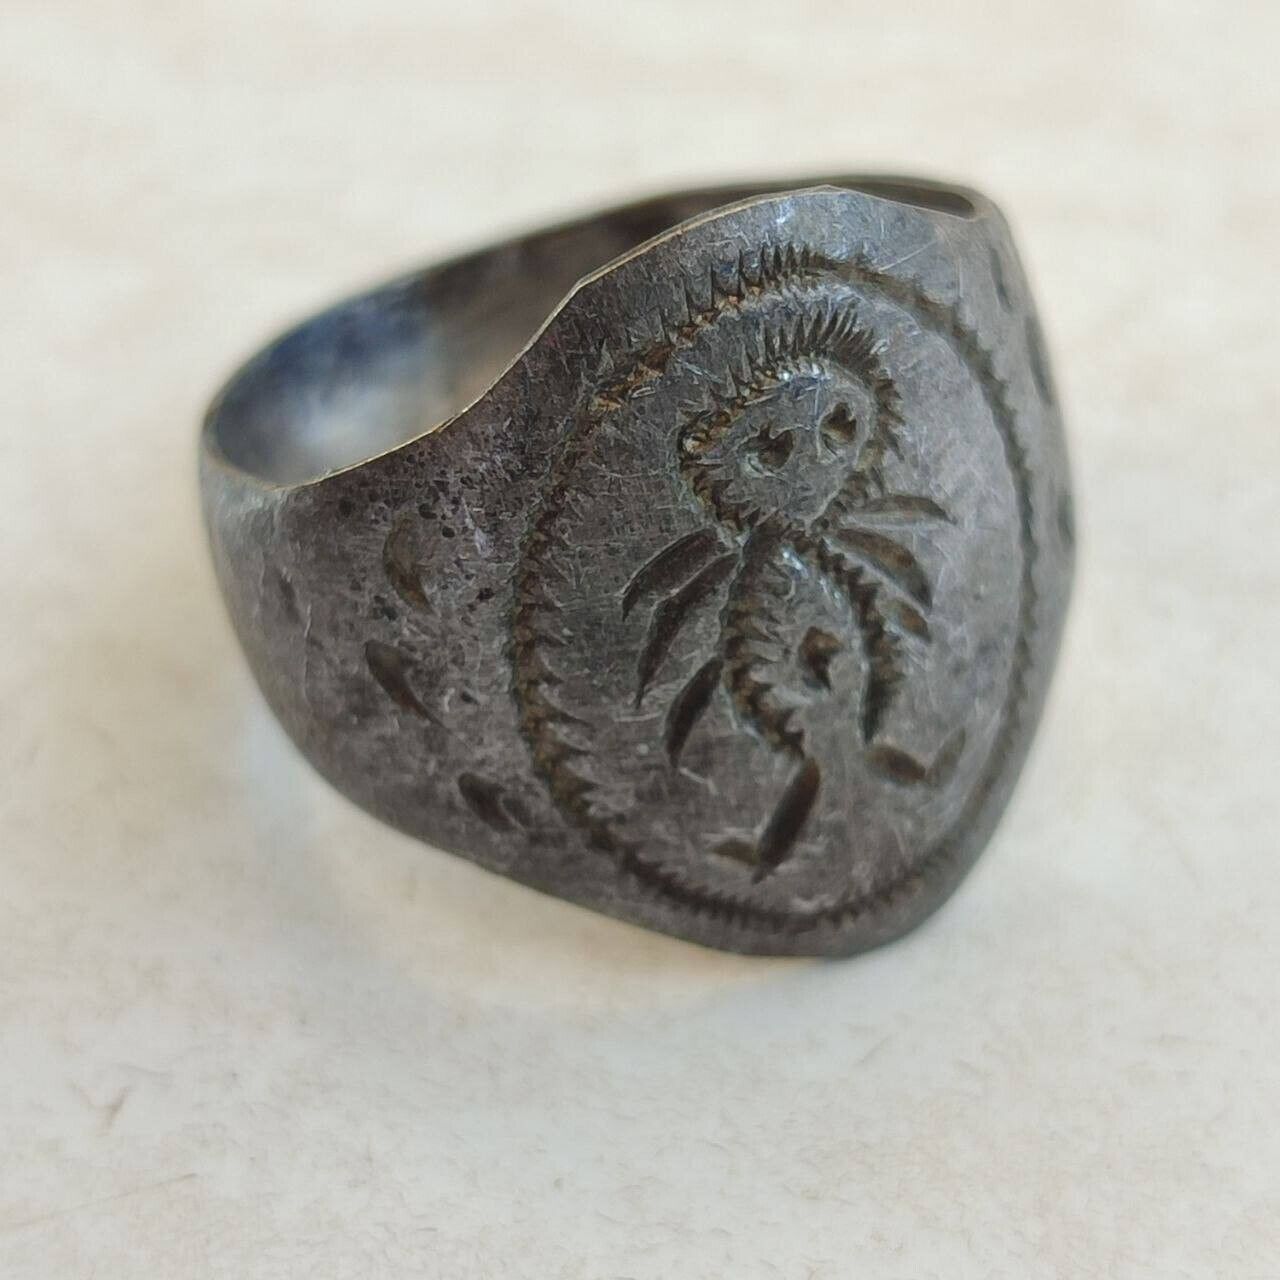 RARE ANCIENT VIKING RING SIZE 11 ARTIFACT AUTHENTIC AMAZING ENGRAVED